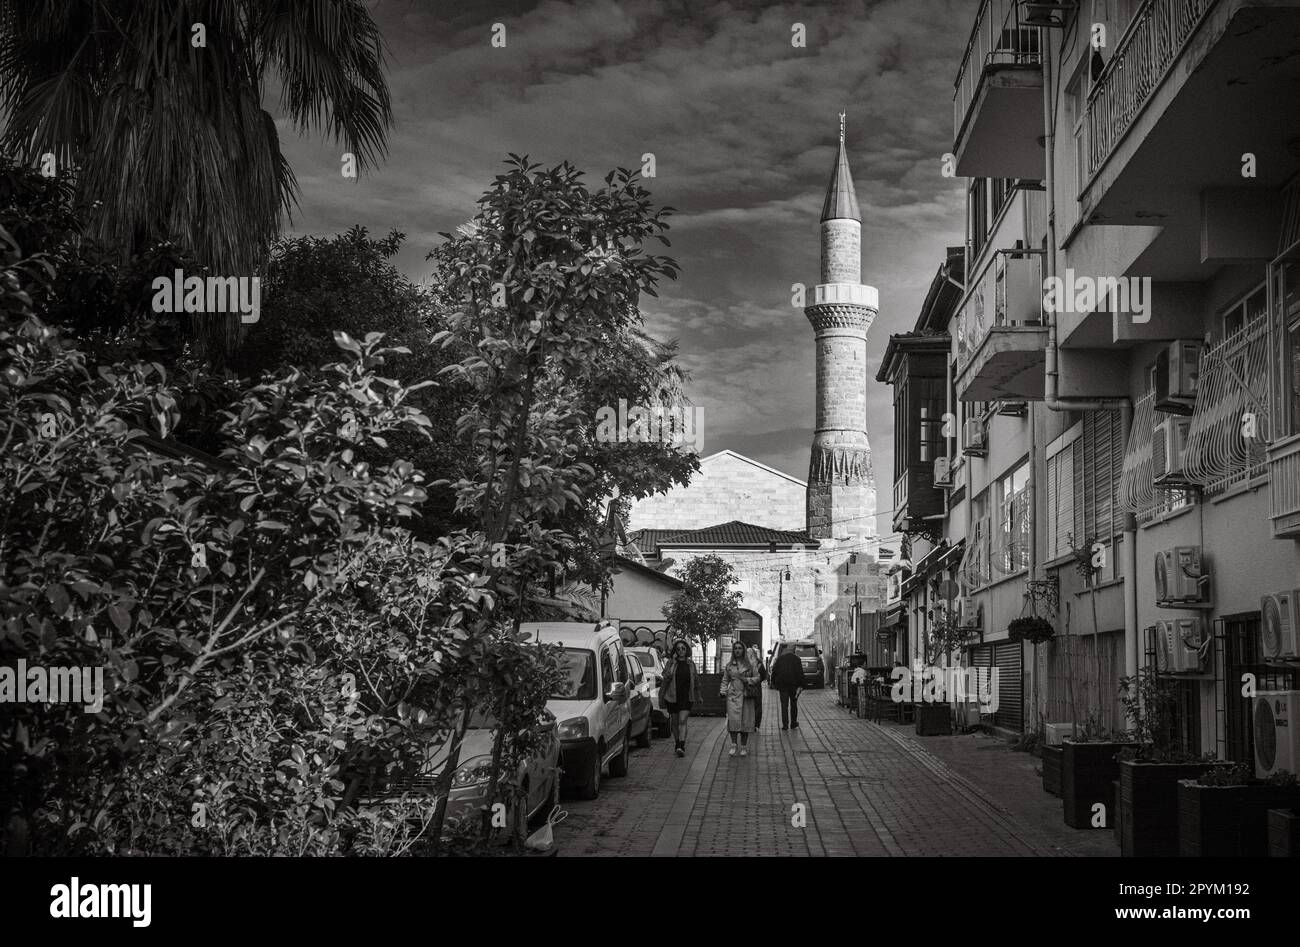 Renovated and restored to its former glory, the Broken Minaret Mosque in Antalya's Kaleici old town is a striking sight to behold. Originally built as Stock Photo